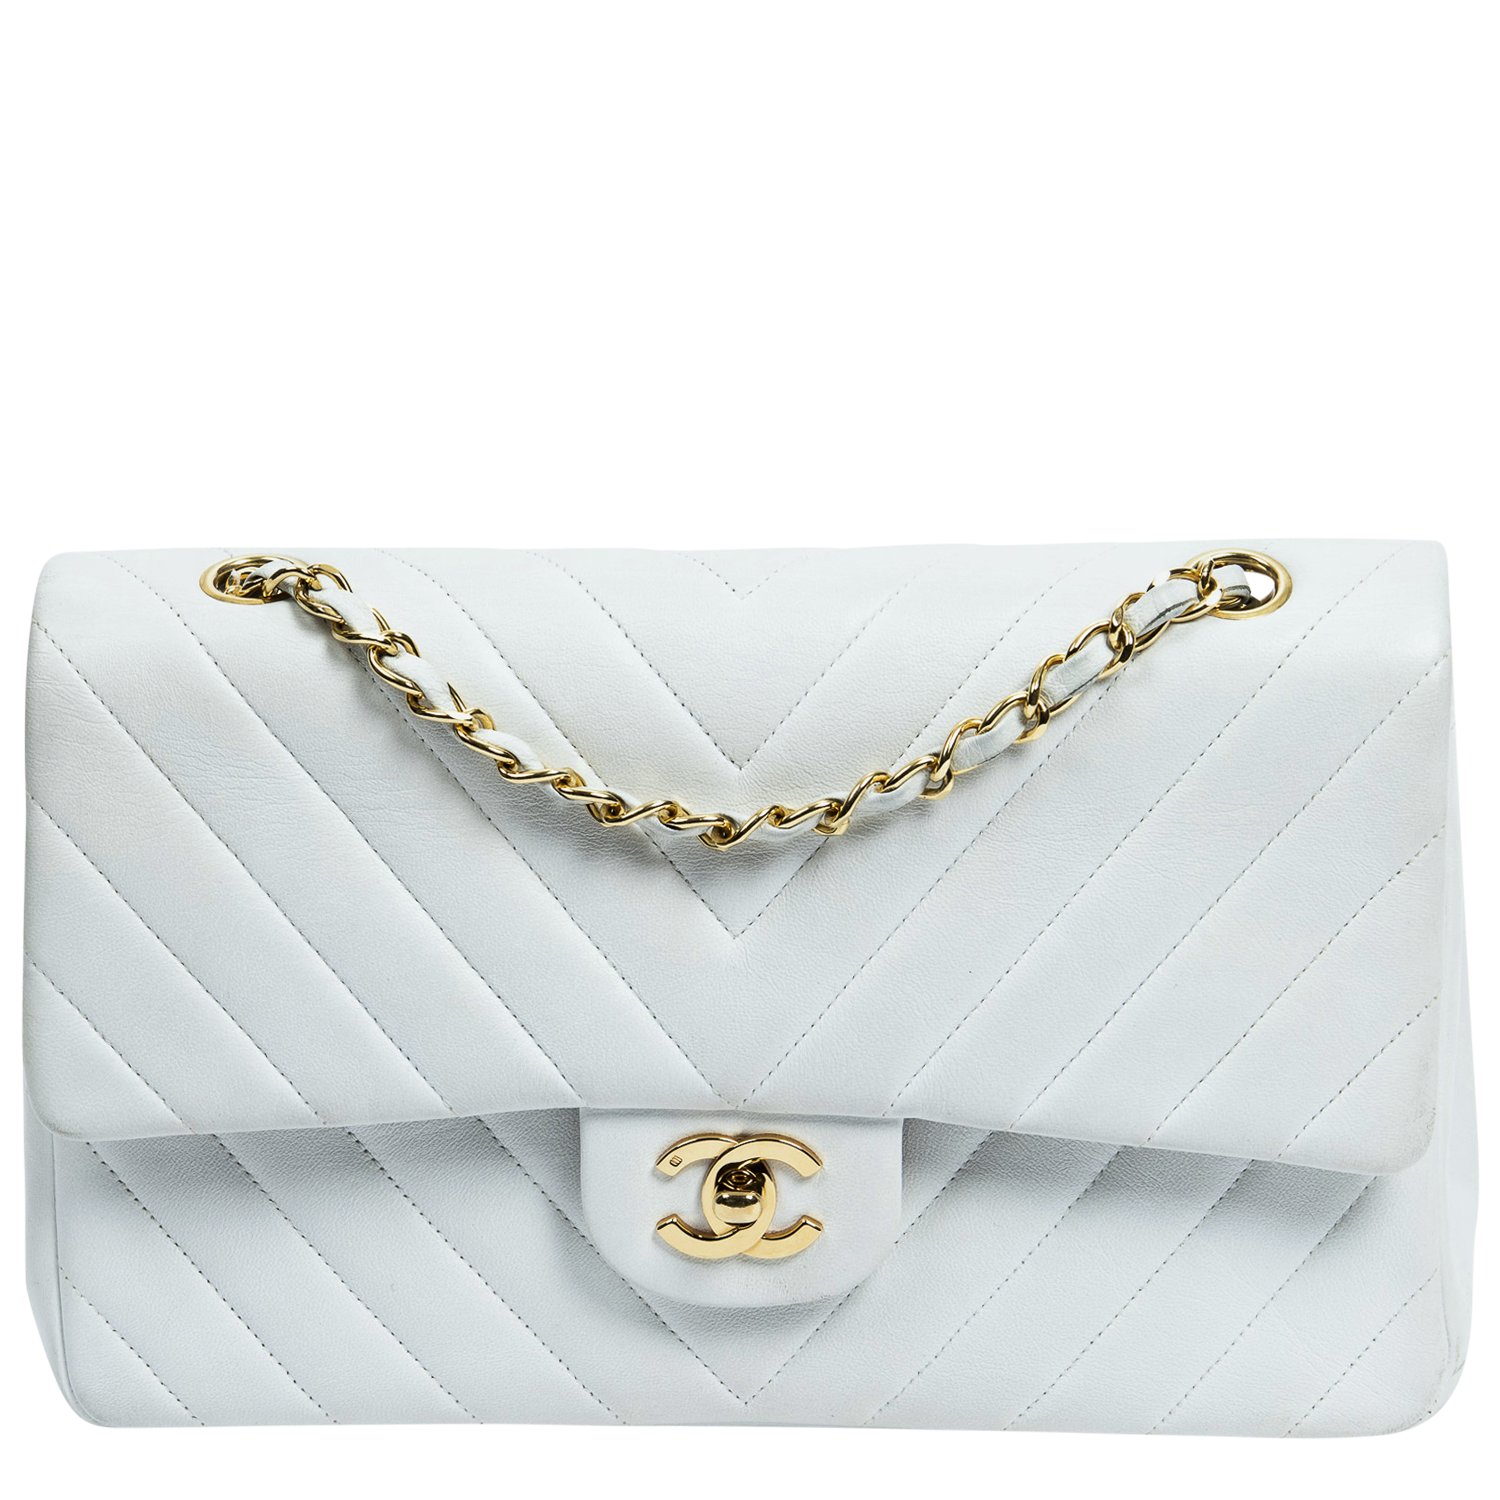 Chanel by Karl Lagerfeld Haute Couture Timeless Bag